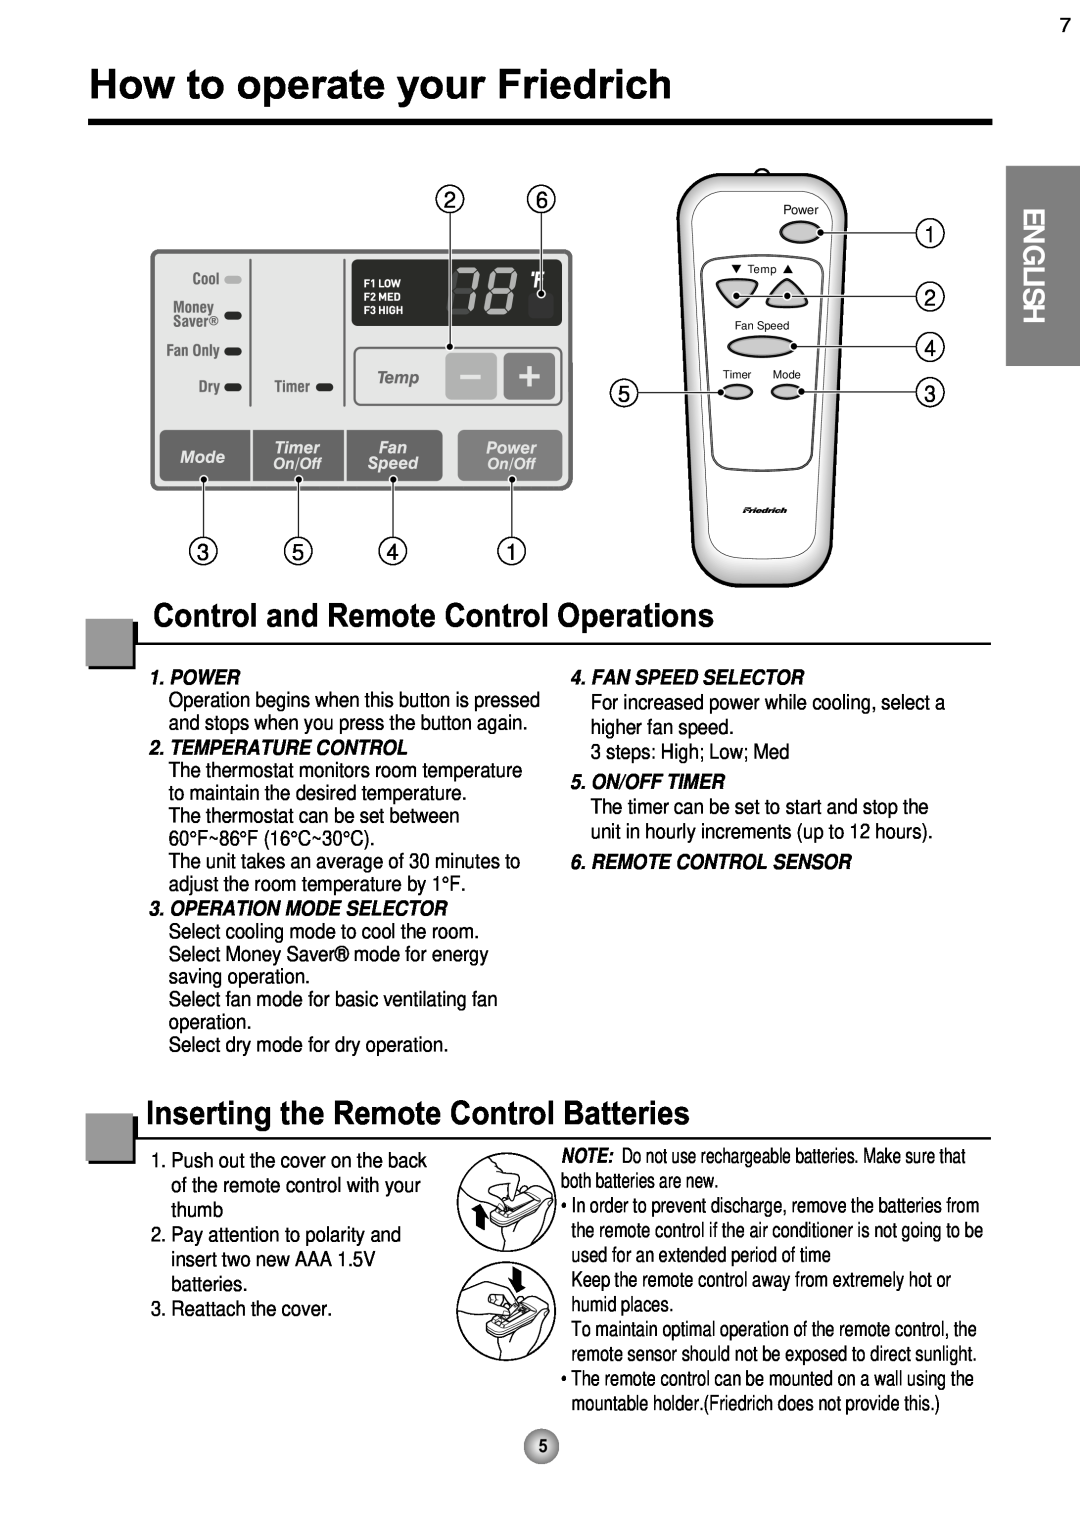 Friedrich CP08 operation manual How to operate your Friedrich, Control and Remote Control Operations, English 